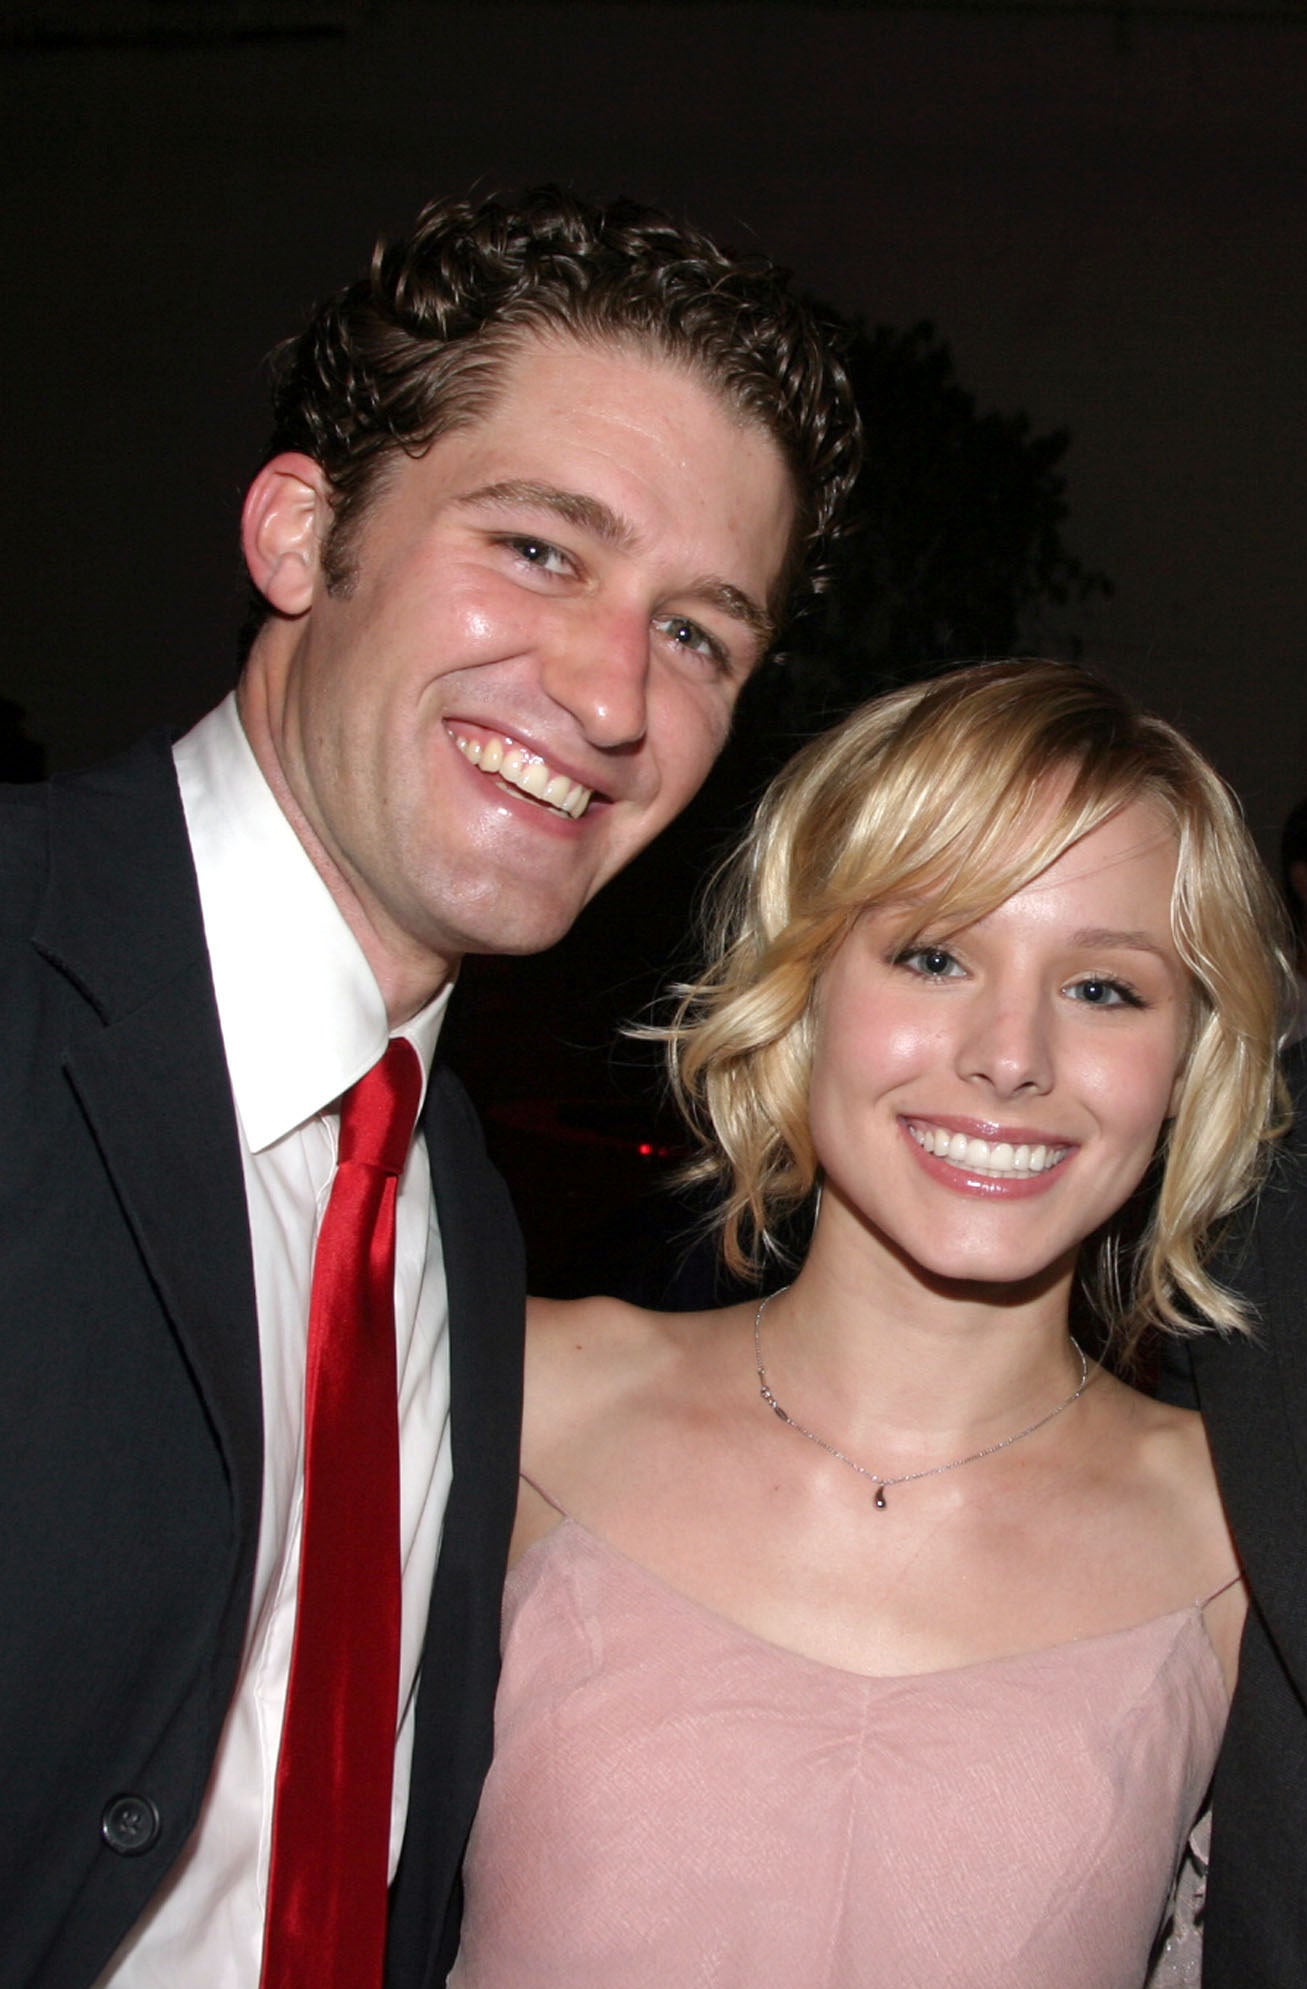 A photo of a young Matthew Morrison and Kristen Bell posing together at an event